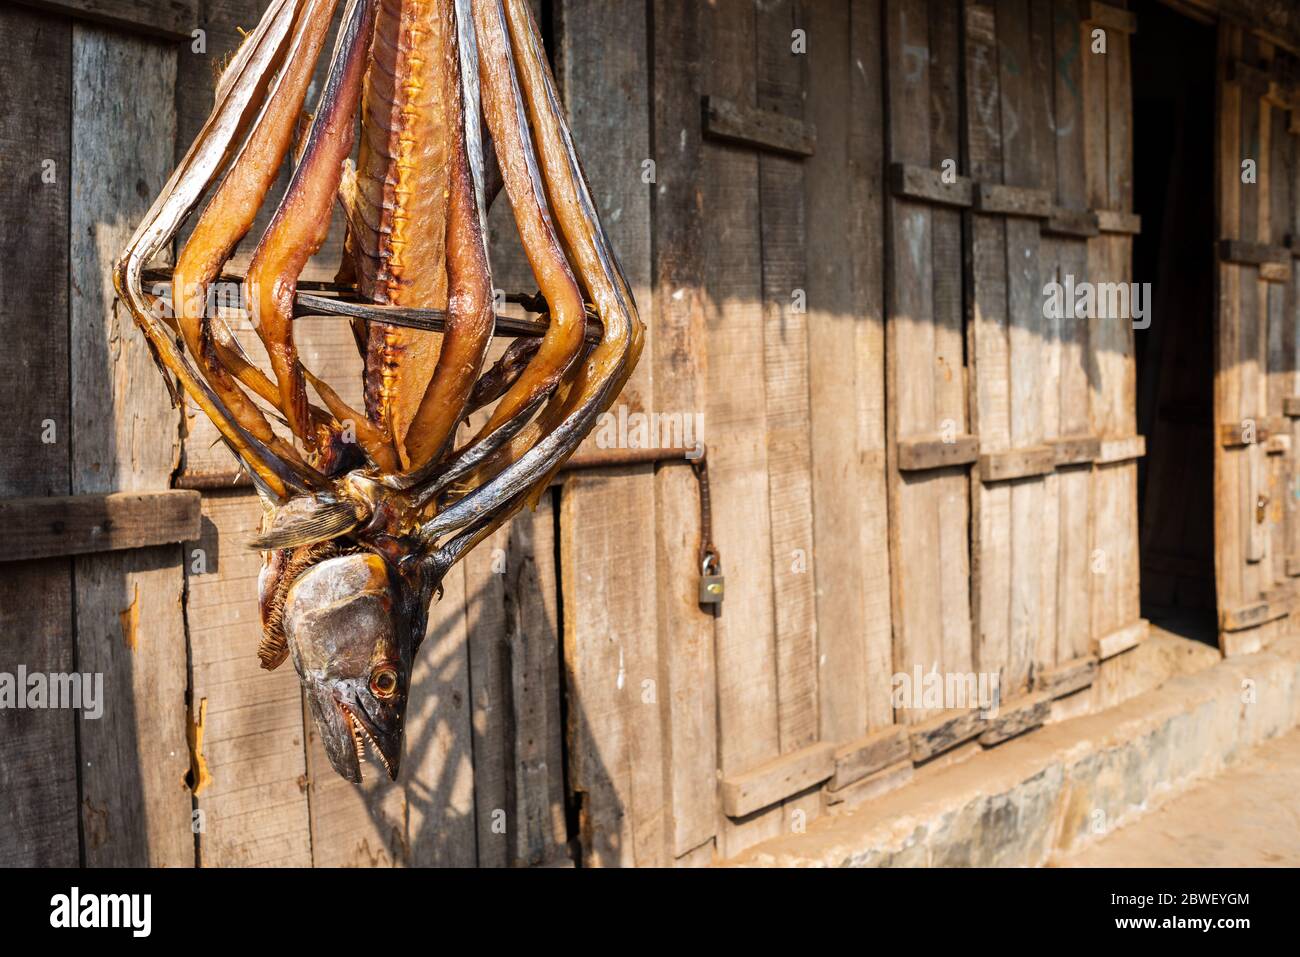 Bangladesh, Drying Fish by Vertically Hanging in Bambo Stick Structures in Cox's Bazar Stock Photo